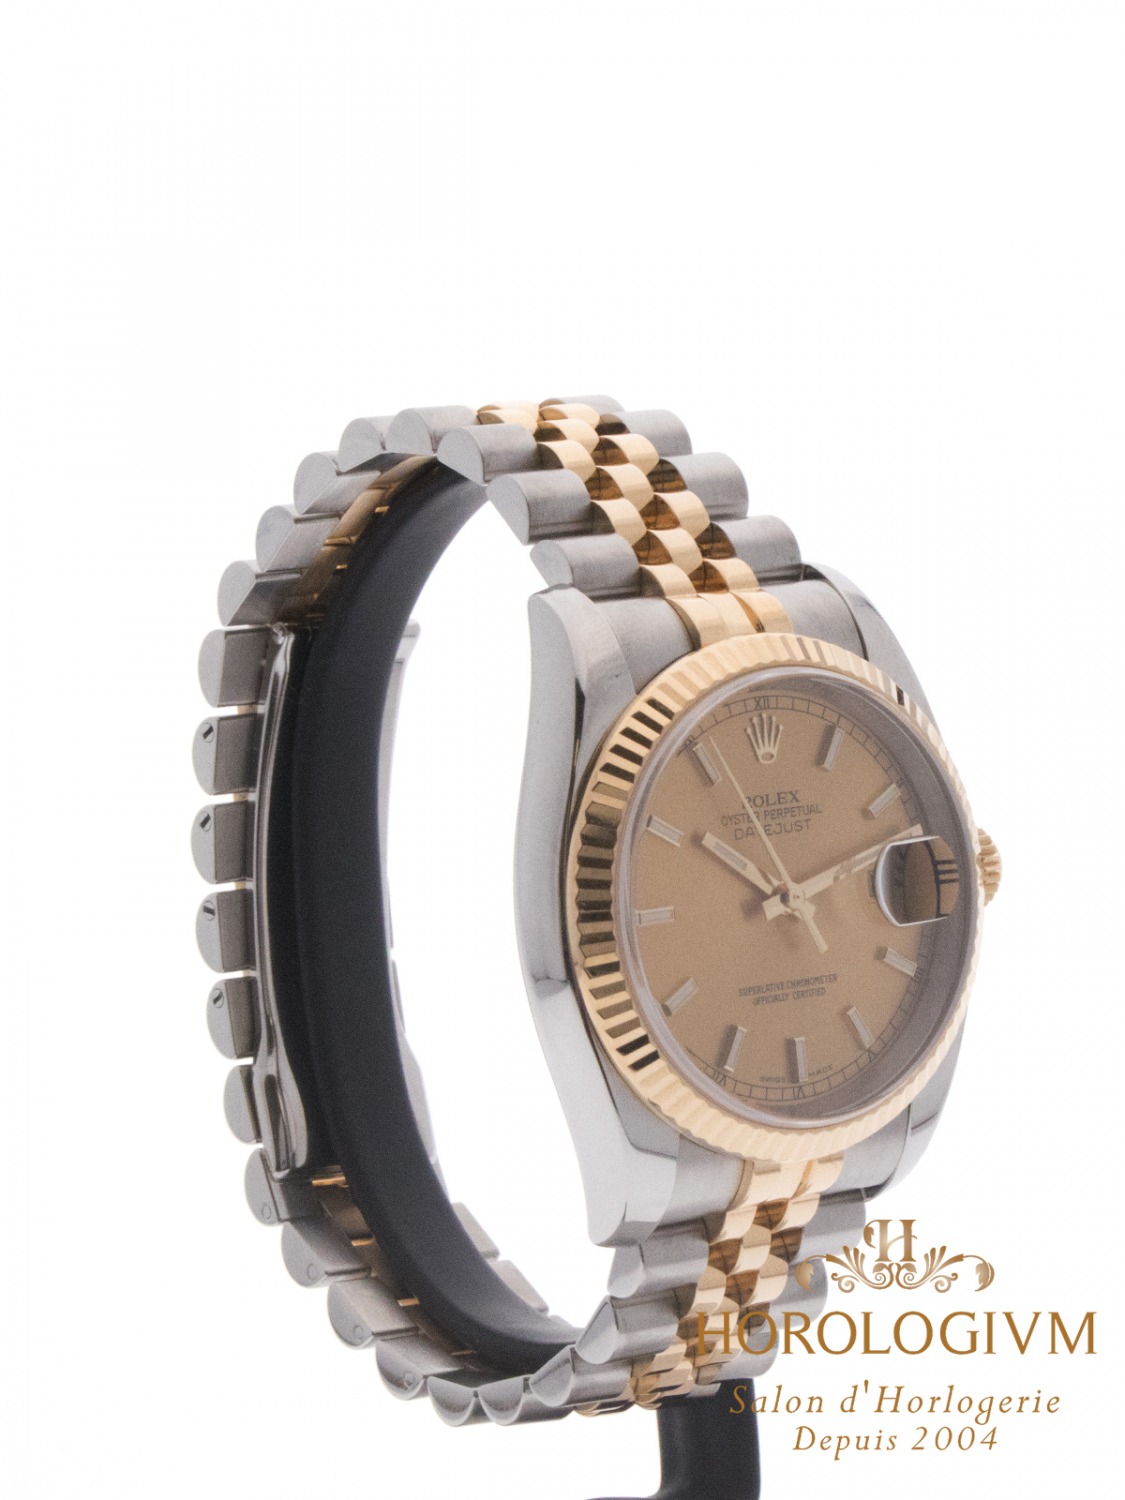 Rolex Datejust TWO-TONE 36MM “Champagne Dial” ref. 116233 watch, two-tone (bi-colored) silver and yellow gold